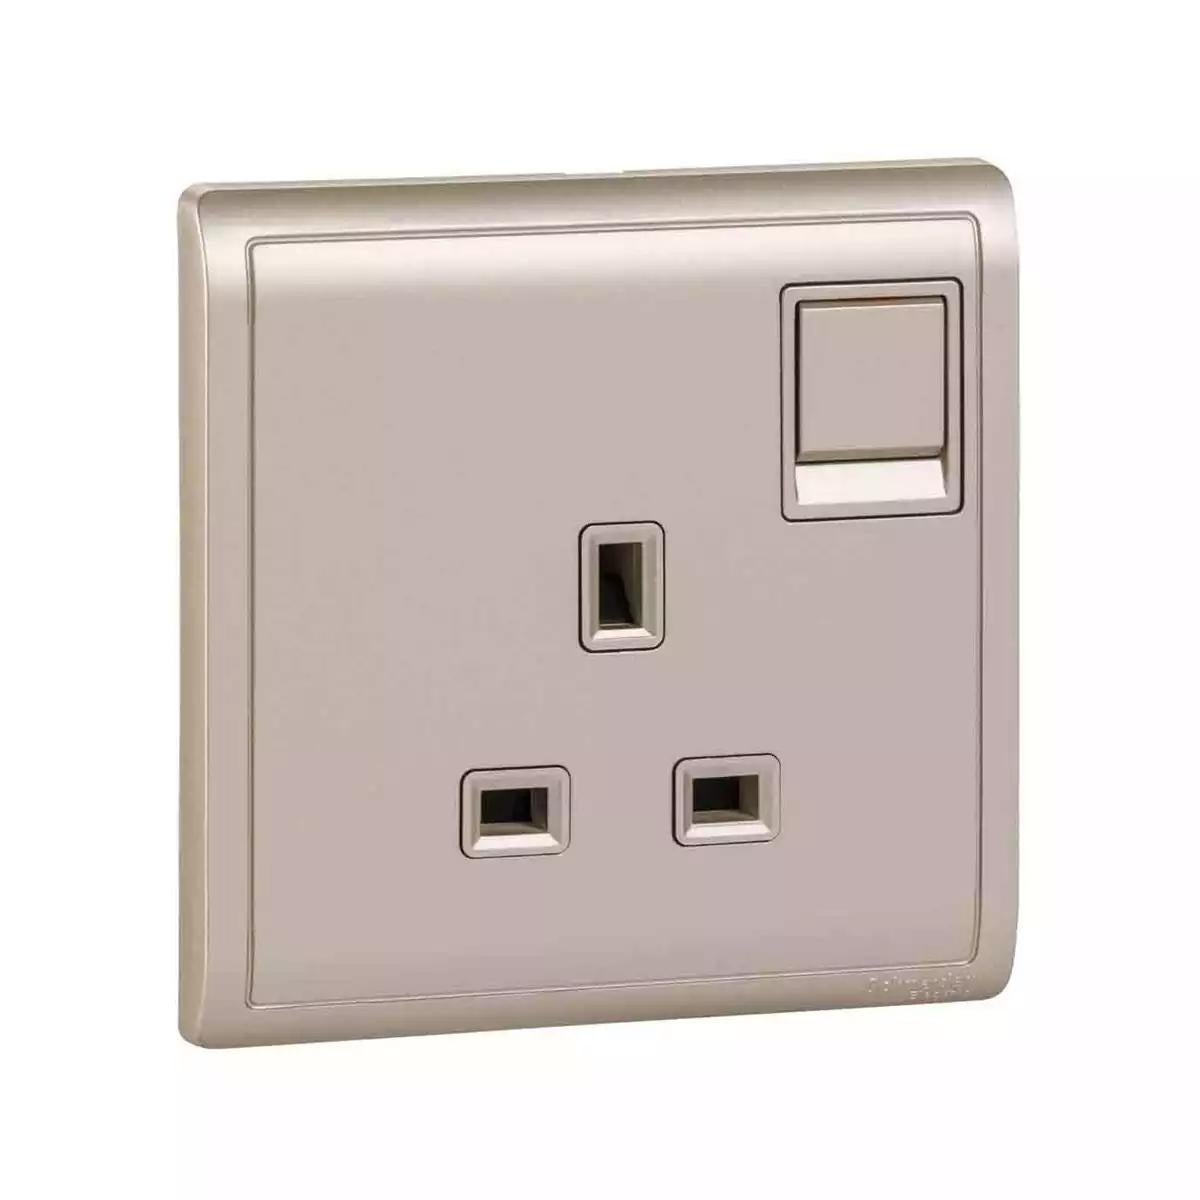 Pieno 13A 250V 1 Gang Switched Socket Wine Gold